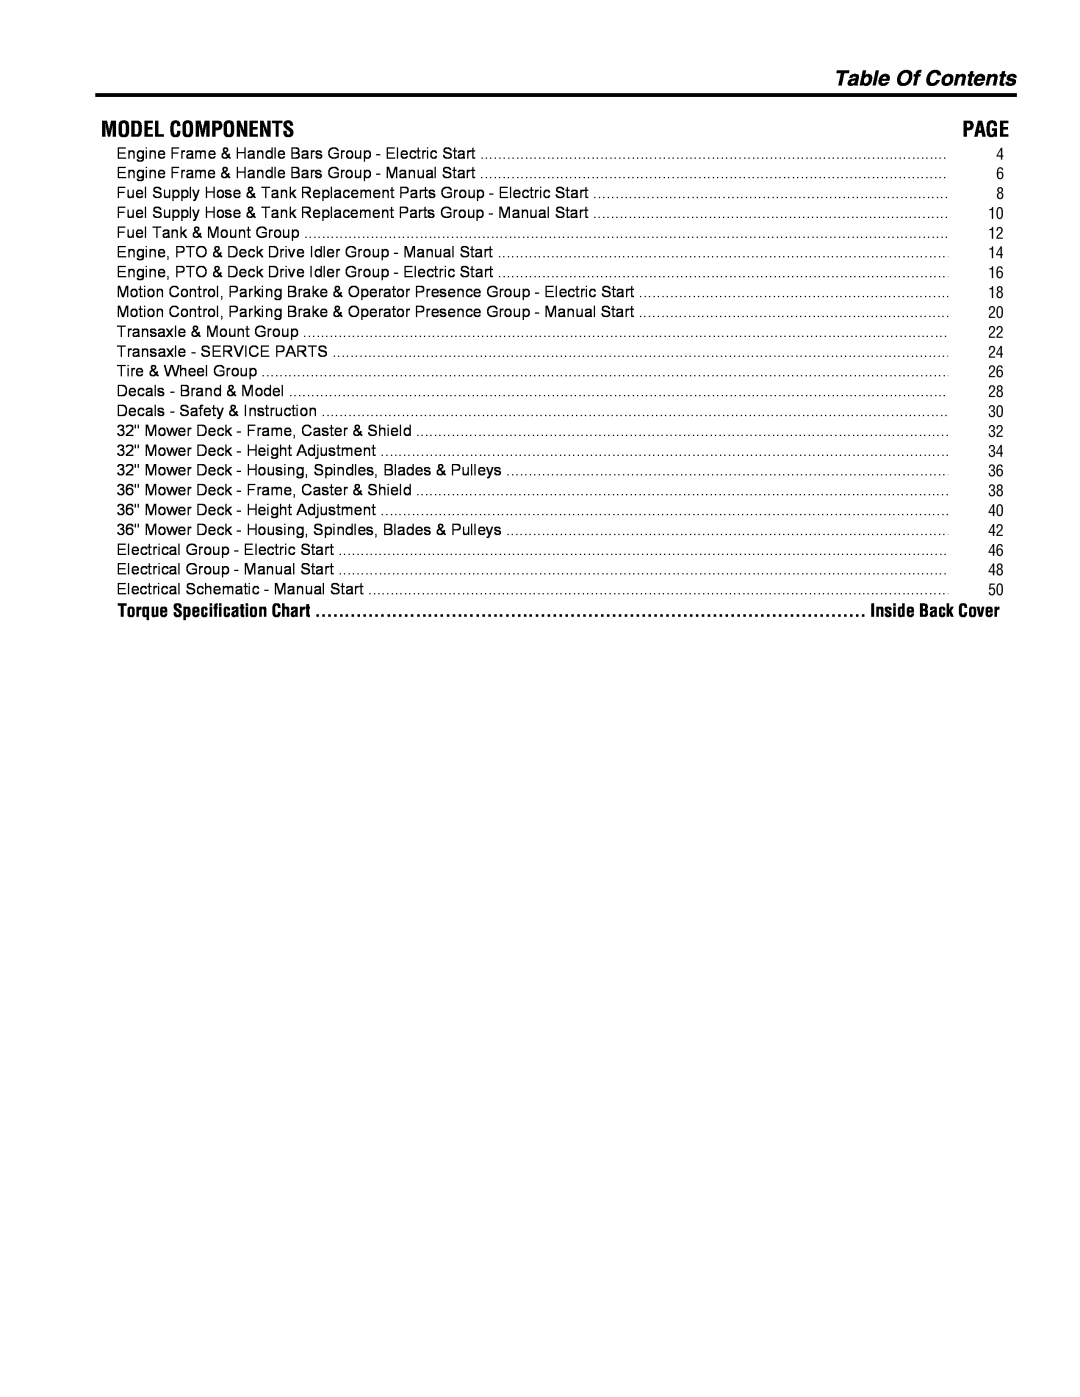 Ferris Industries HC36KAV13E, HC32KAV13 manual Table Of Contents, Model Components, Page, Torque Specification Chart 